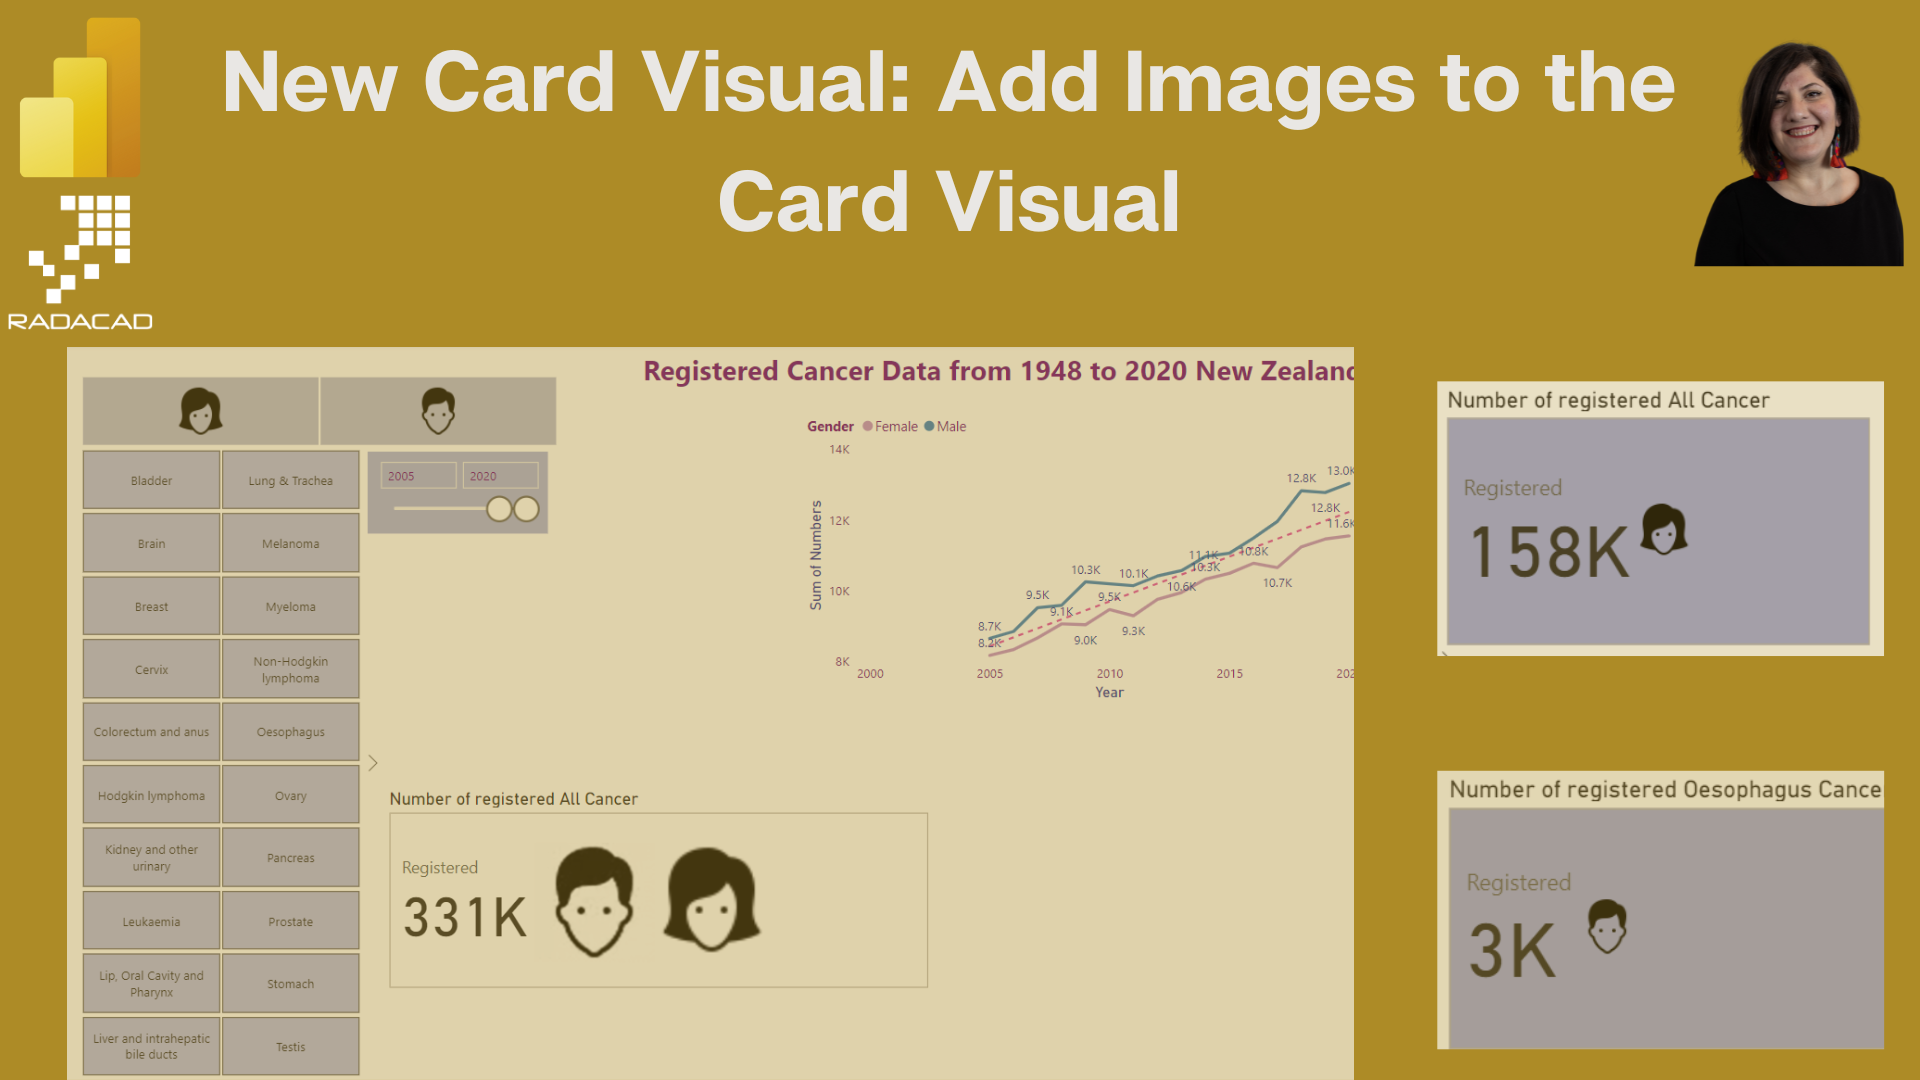 New Card Visual: Add Images to the Card Visual